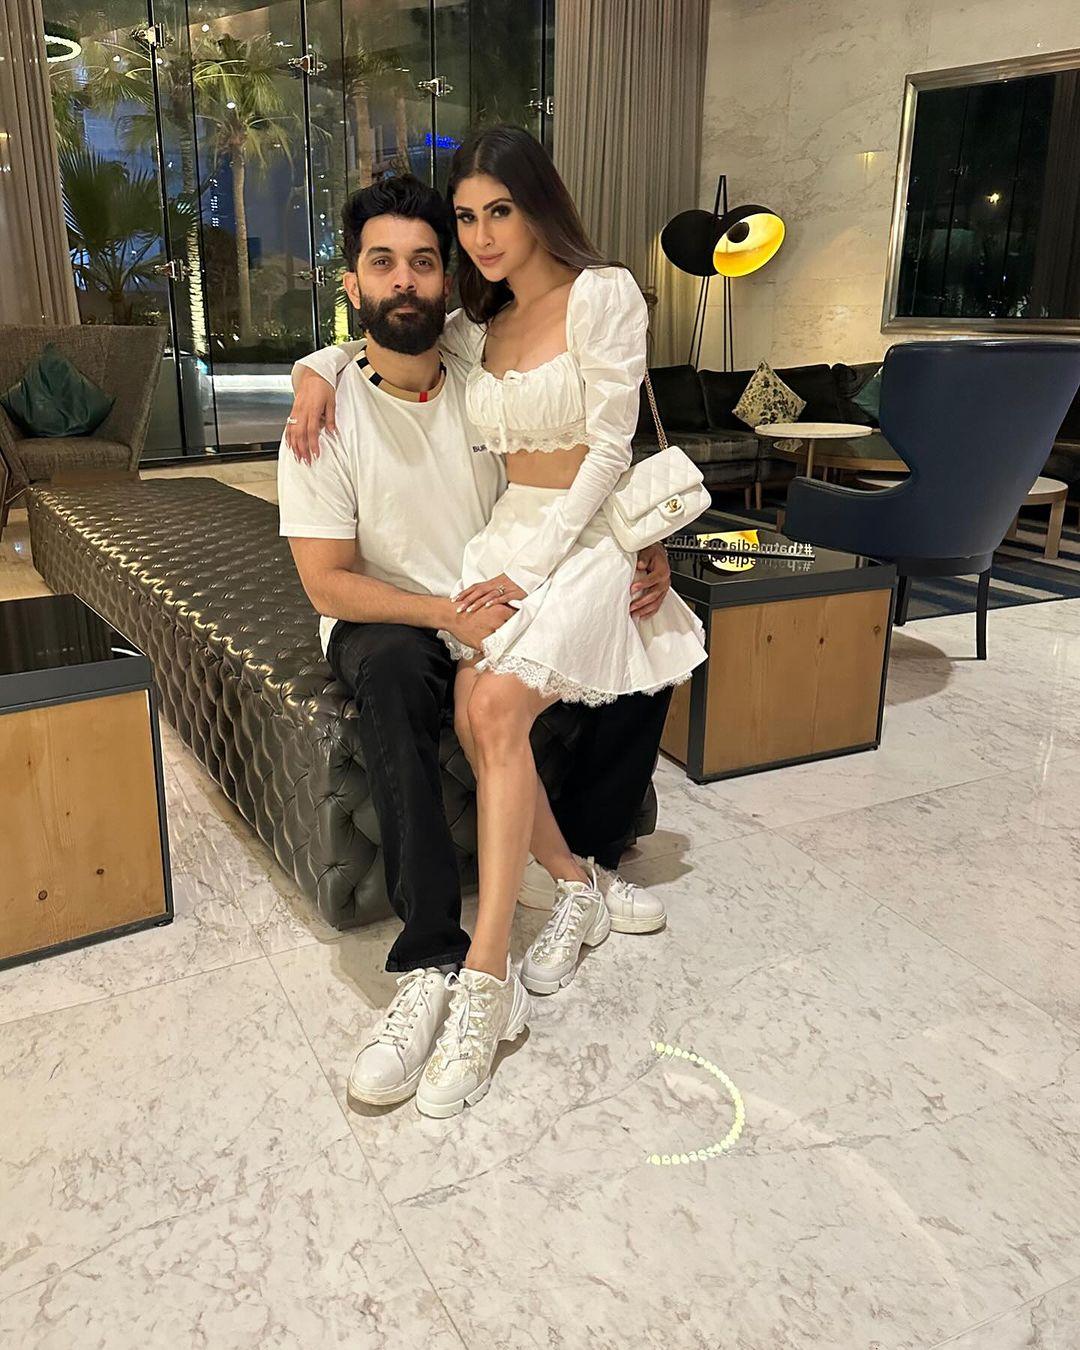 In another photo dump, the actress shared glimpses from her recent holiday as well as some moments with husband Suraj Nambiar